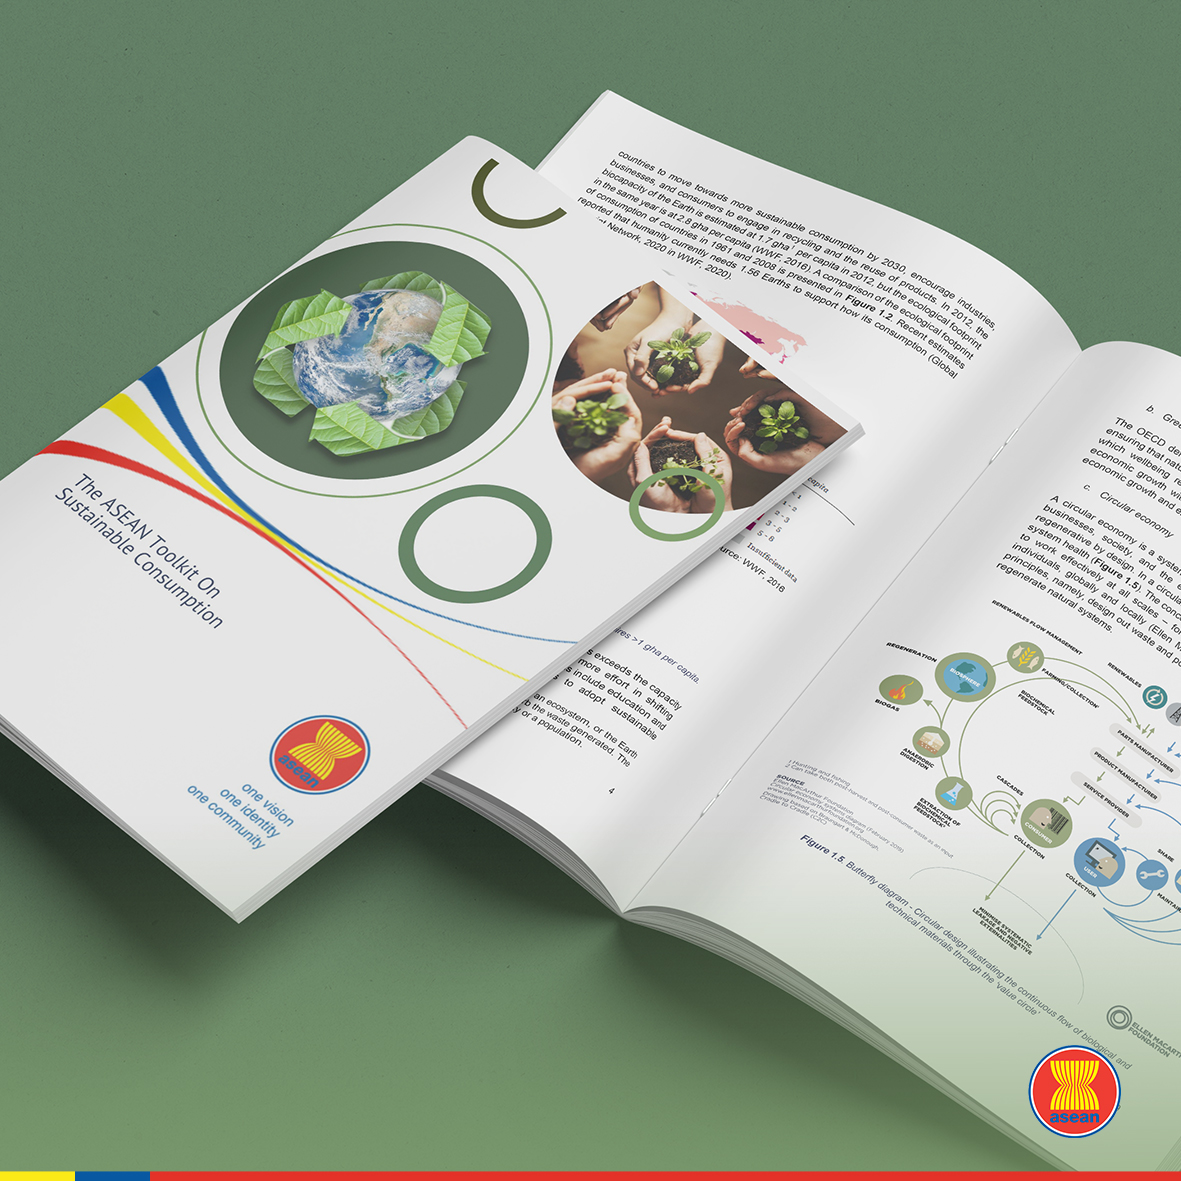 The #ASEAN Toolkit on Sustainable Consumption provides guidance and advocacy materials to enhance the understanding of government officials, businesses and consumer associations on the concept & policy implications. Check it out: bit.ly/ASEAN_Sustaina…